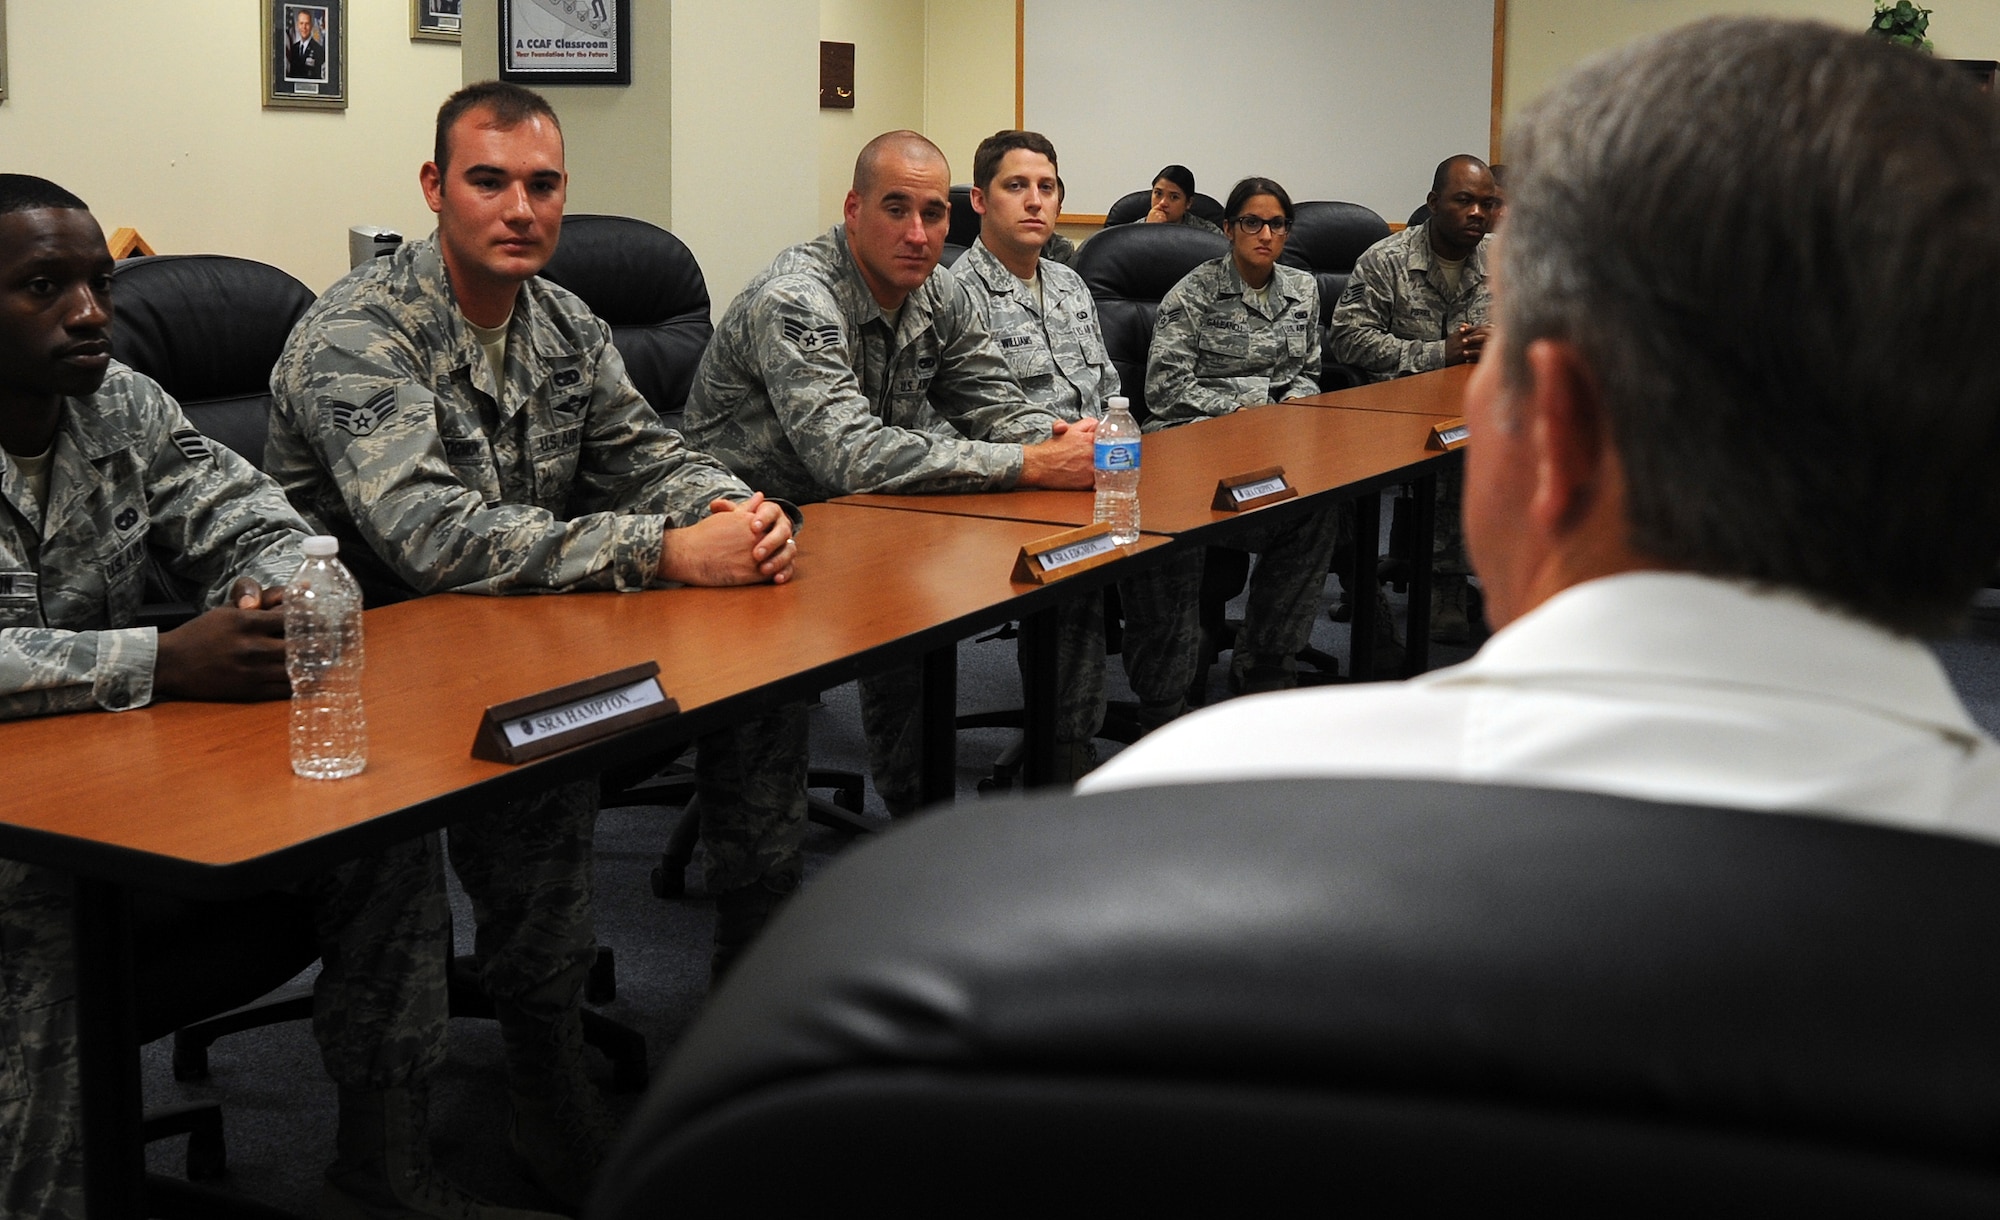 ALTUS AIR FORCE BASE, Okla. – Fifteenth Chief Master Sergeant of the Air Force (ret.) Rodney McKinley speaks to Airman Leadership School class 13-F, July 19. McKinley shared his past experiences from a wide variety of career fields, including medical and aircraft maintenance, to help the Airmen become more effective leaders. McKinley was appointed the 15th CMSAF in 2006 and retired after 30 years of service in 2009. McKinley visited Altus AFB to be the guest speaker at the Senior NCO Induction Ceremony.  (U.S. Air Force photo by Airman 1st Class Levin Boland / Released)